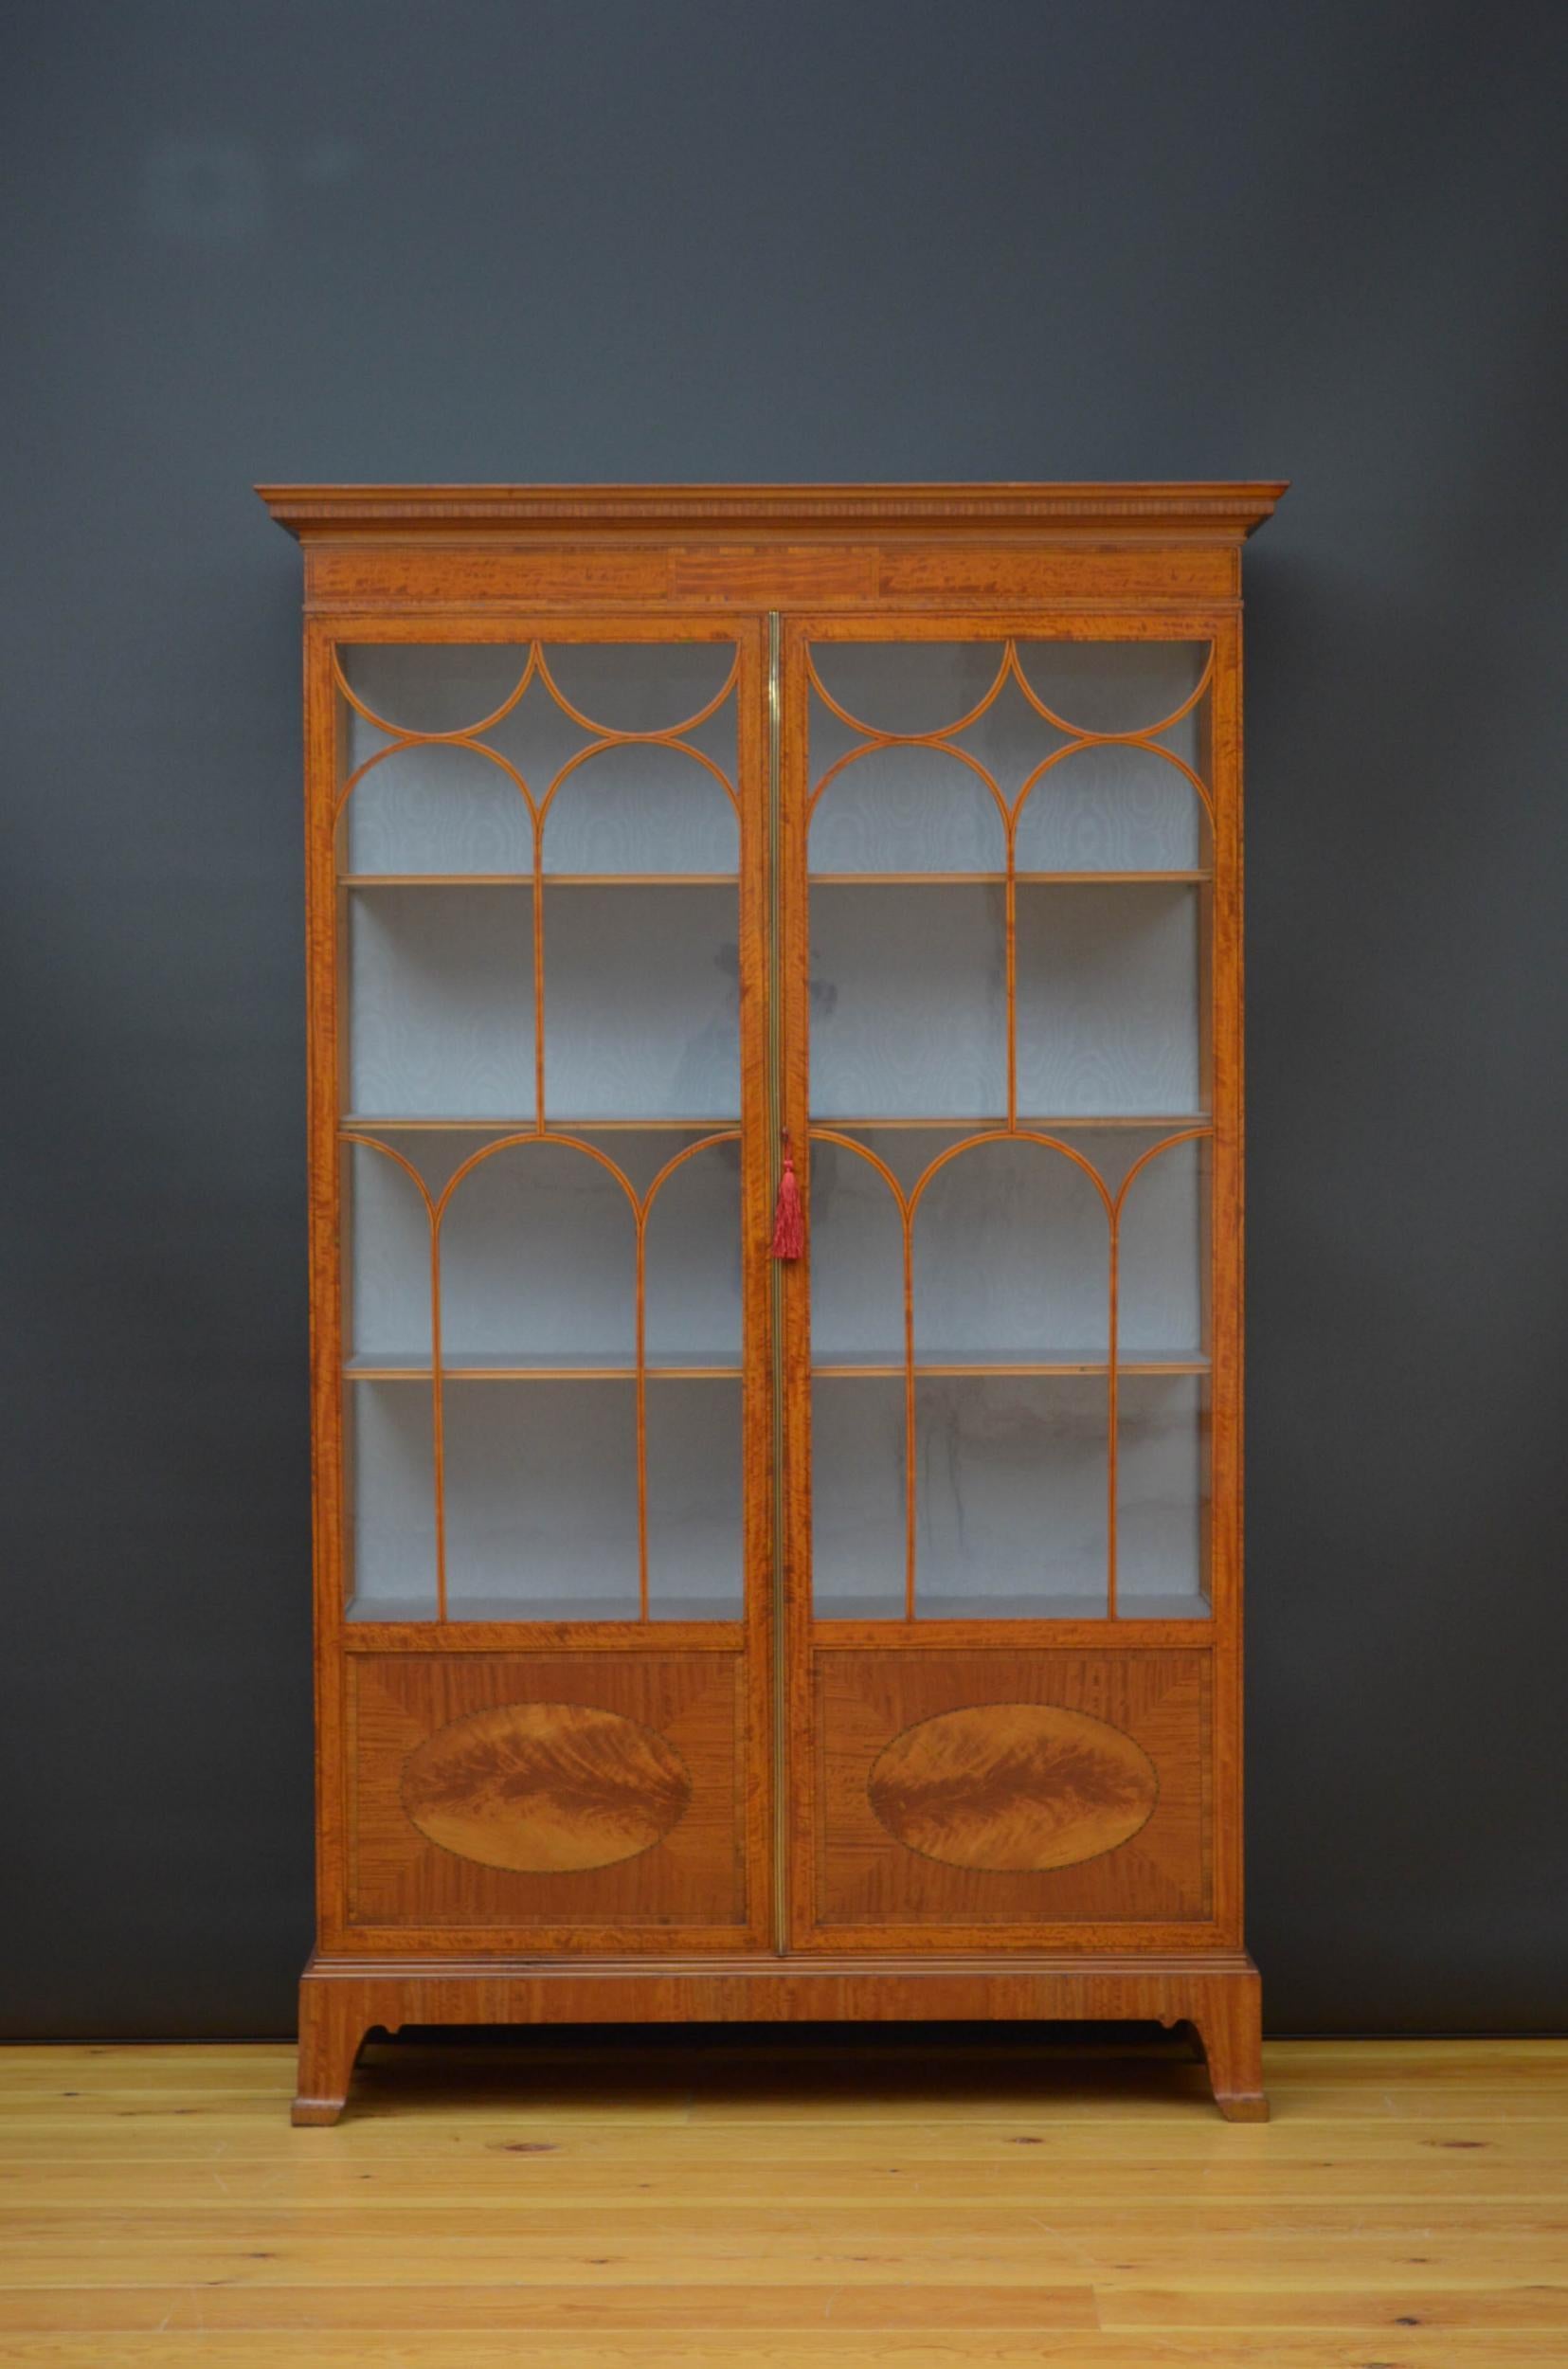 Sn5047 Edwardian, two door satinwood vitrine, having moulded cornice with dentil inlaid decoration below and double string inlaid frieze with crossbanded panel to the centre above a pair of sting inlaid glazed doors with finely inlaid panels to